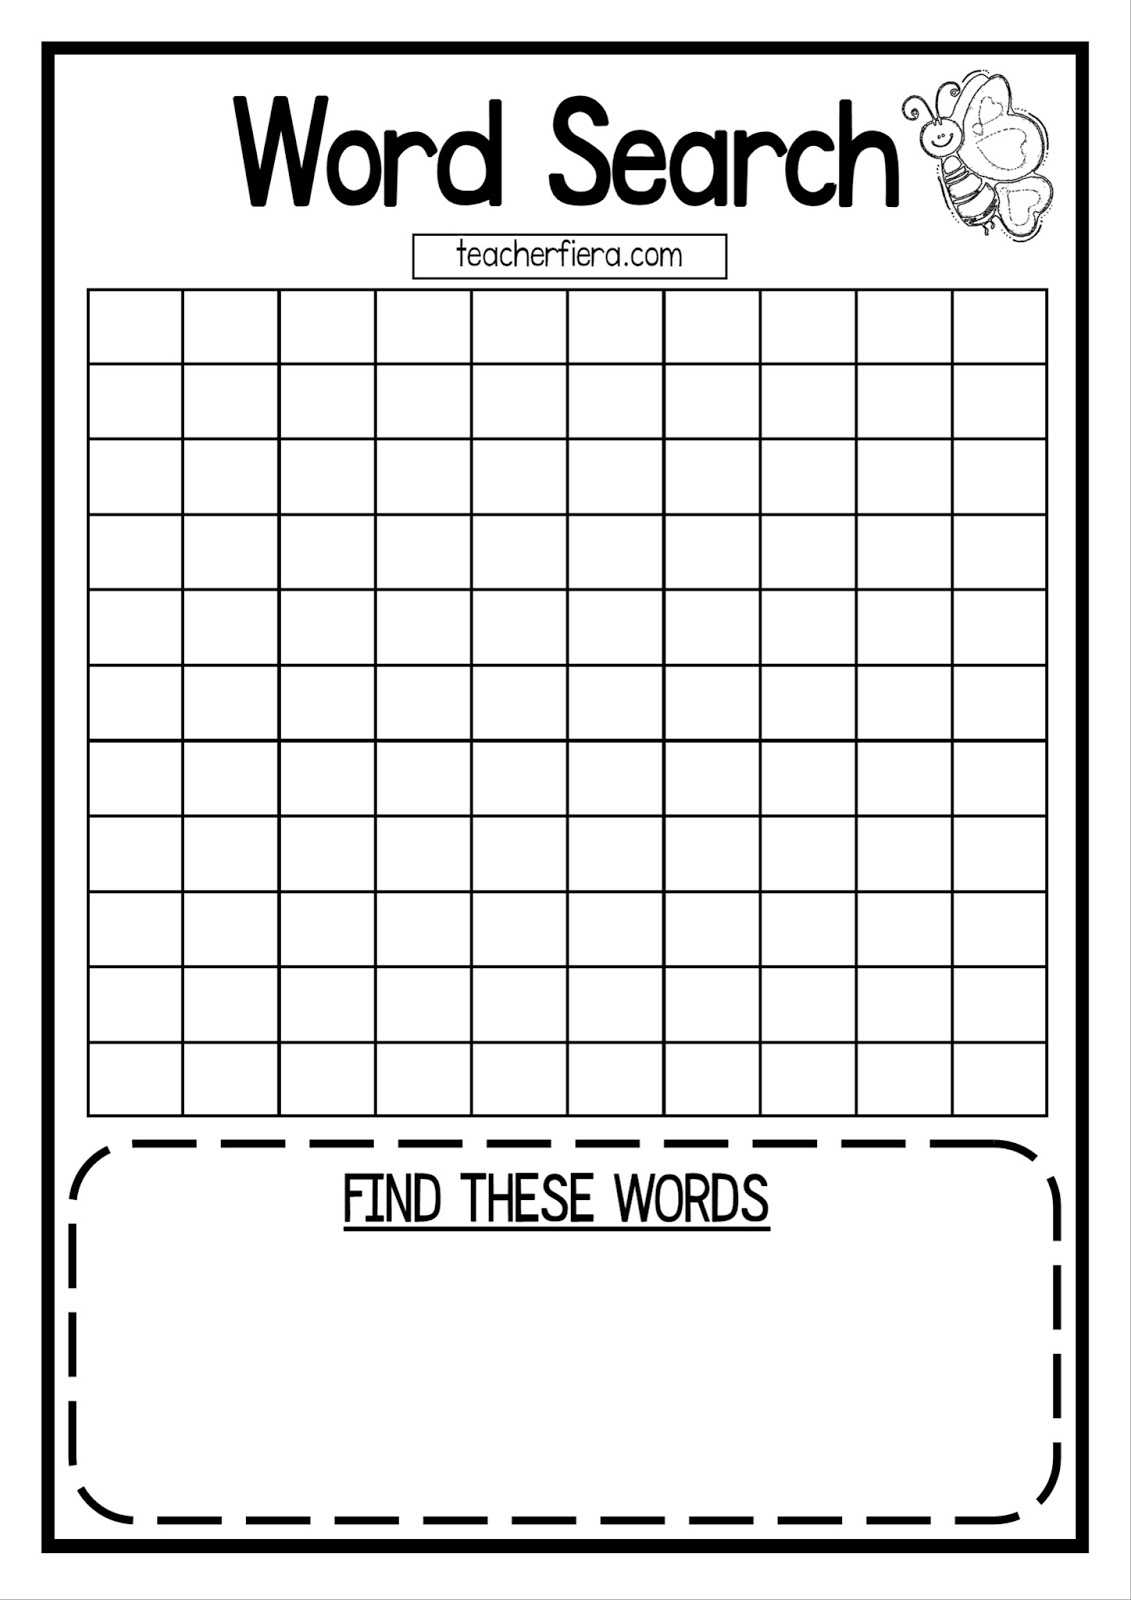 teacherfiera-word-search-templates-coloured-and-black-intended-for